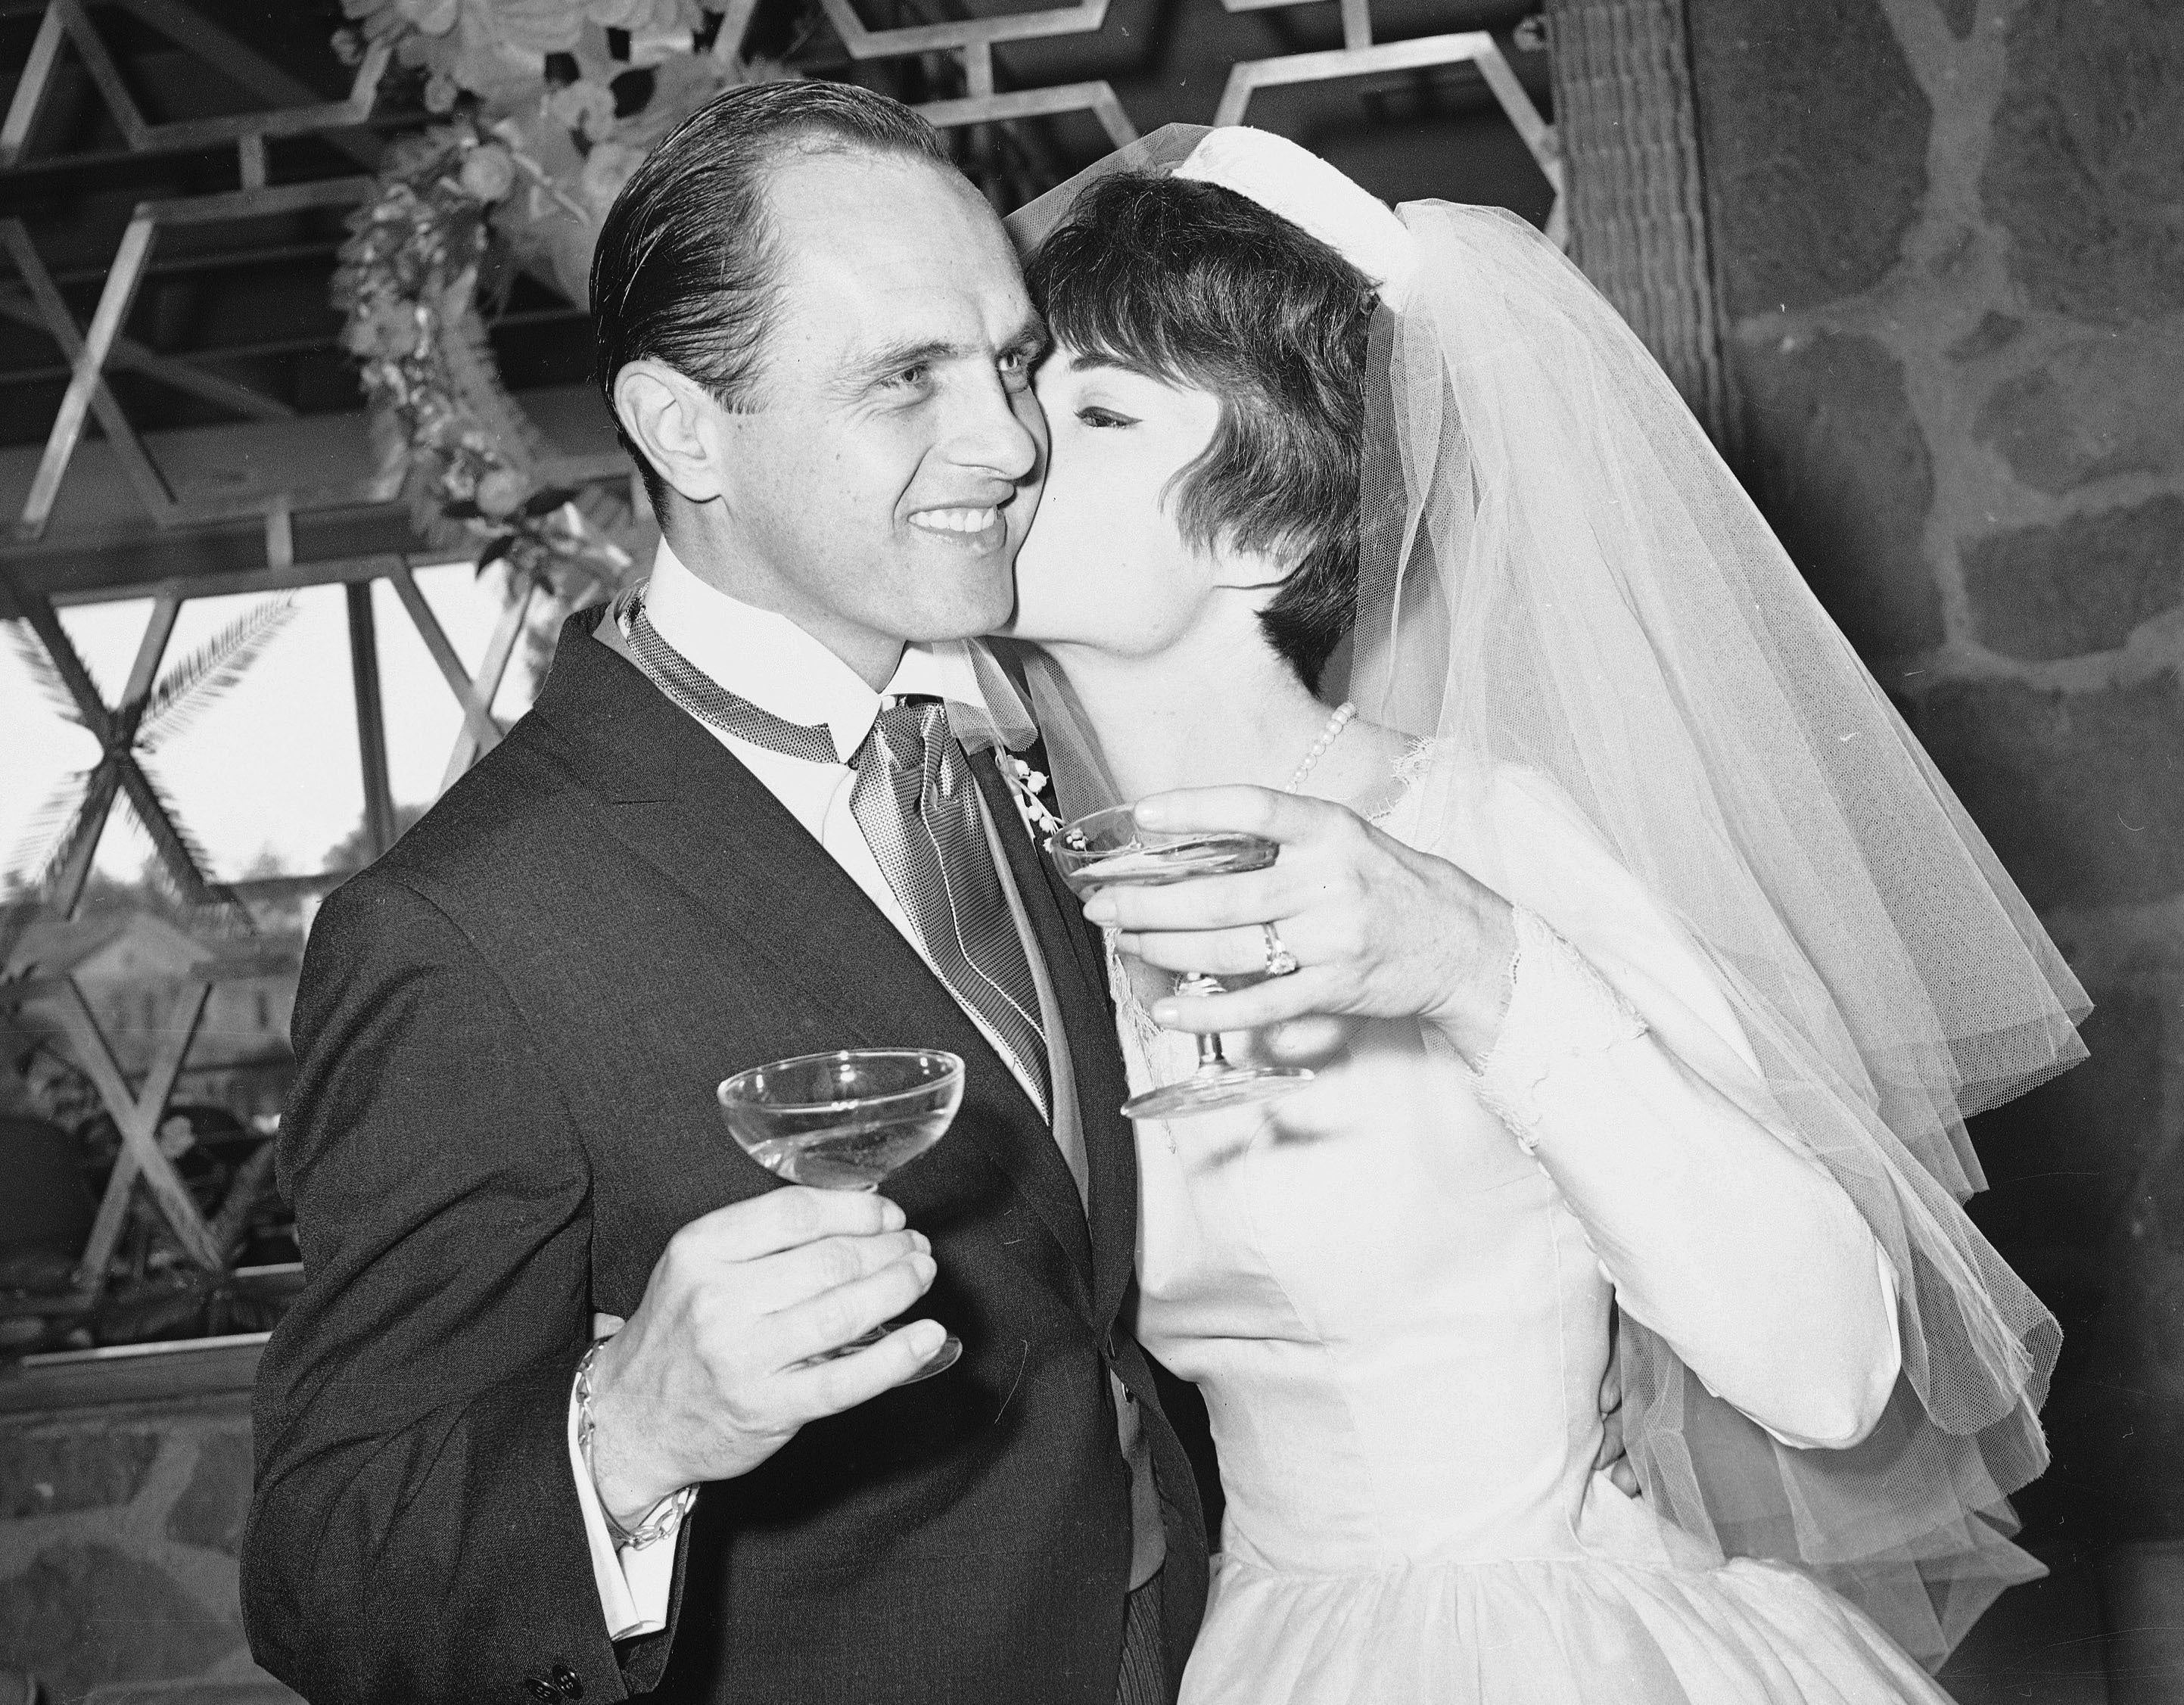 Newhart, 33, and his bride Virginia Quinn, 22, kiss during a toast at the reception that followed their marriage in 1963